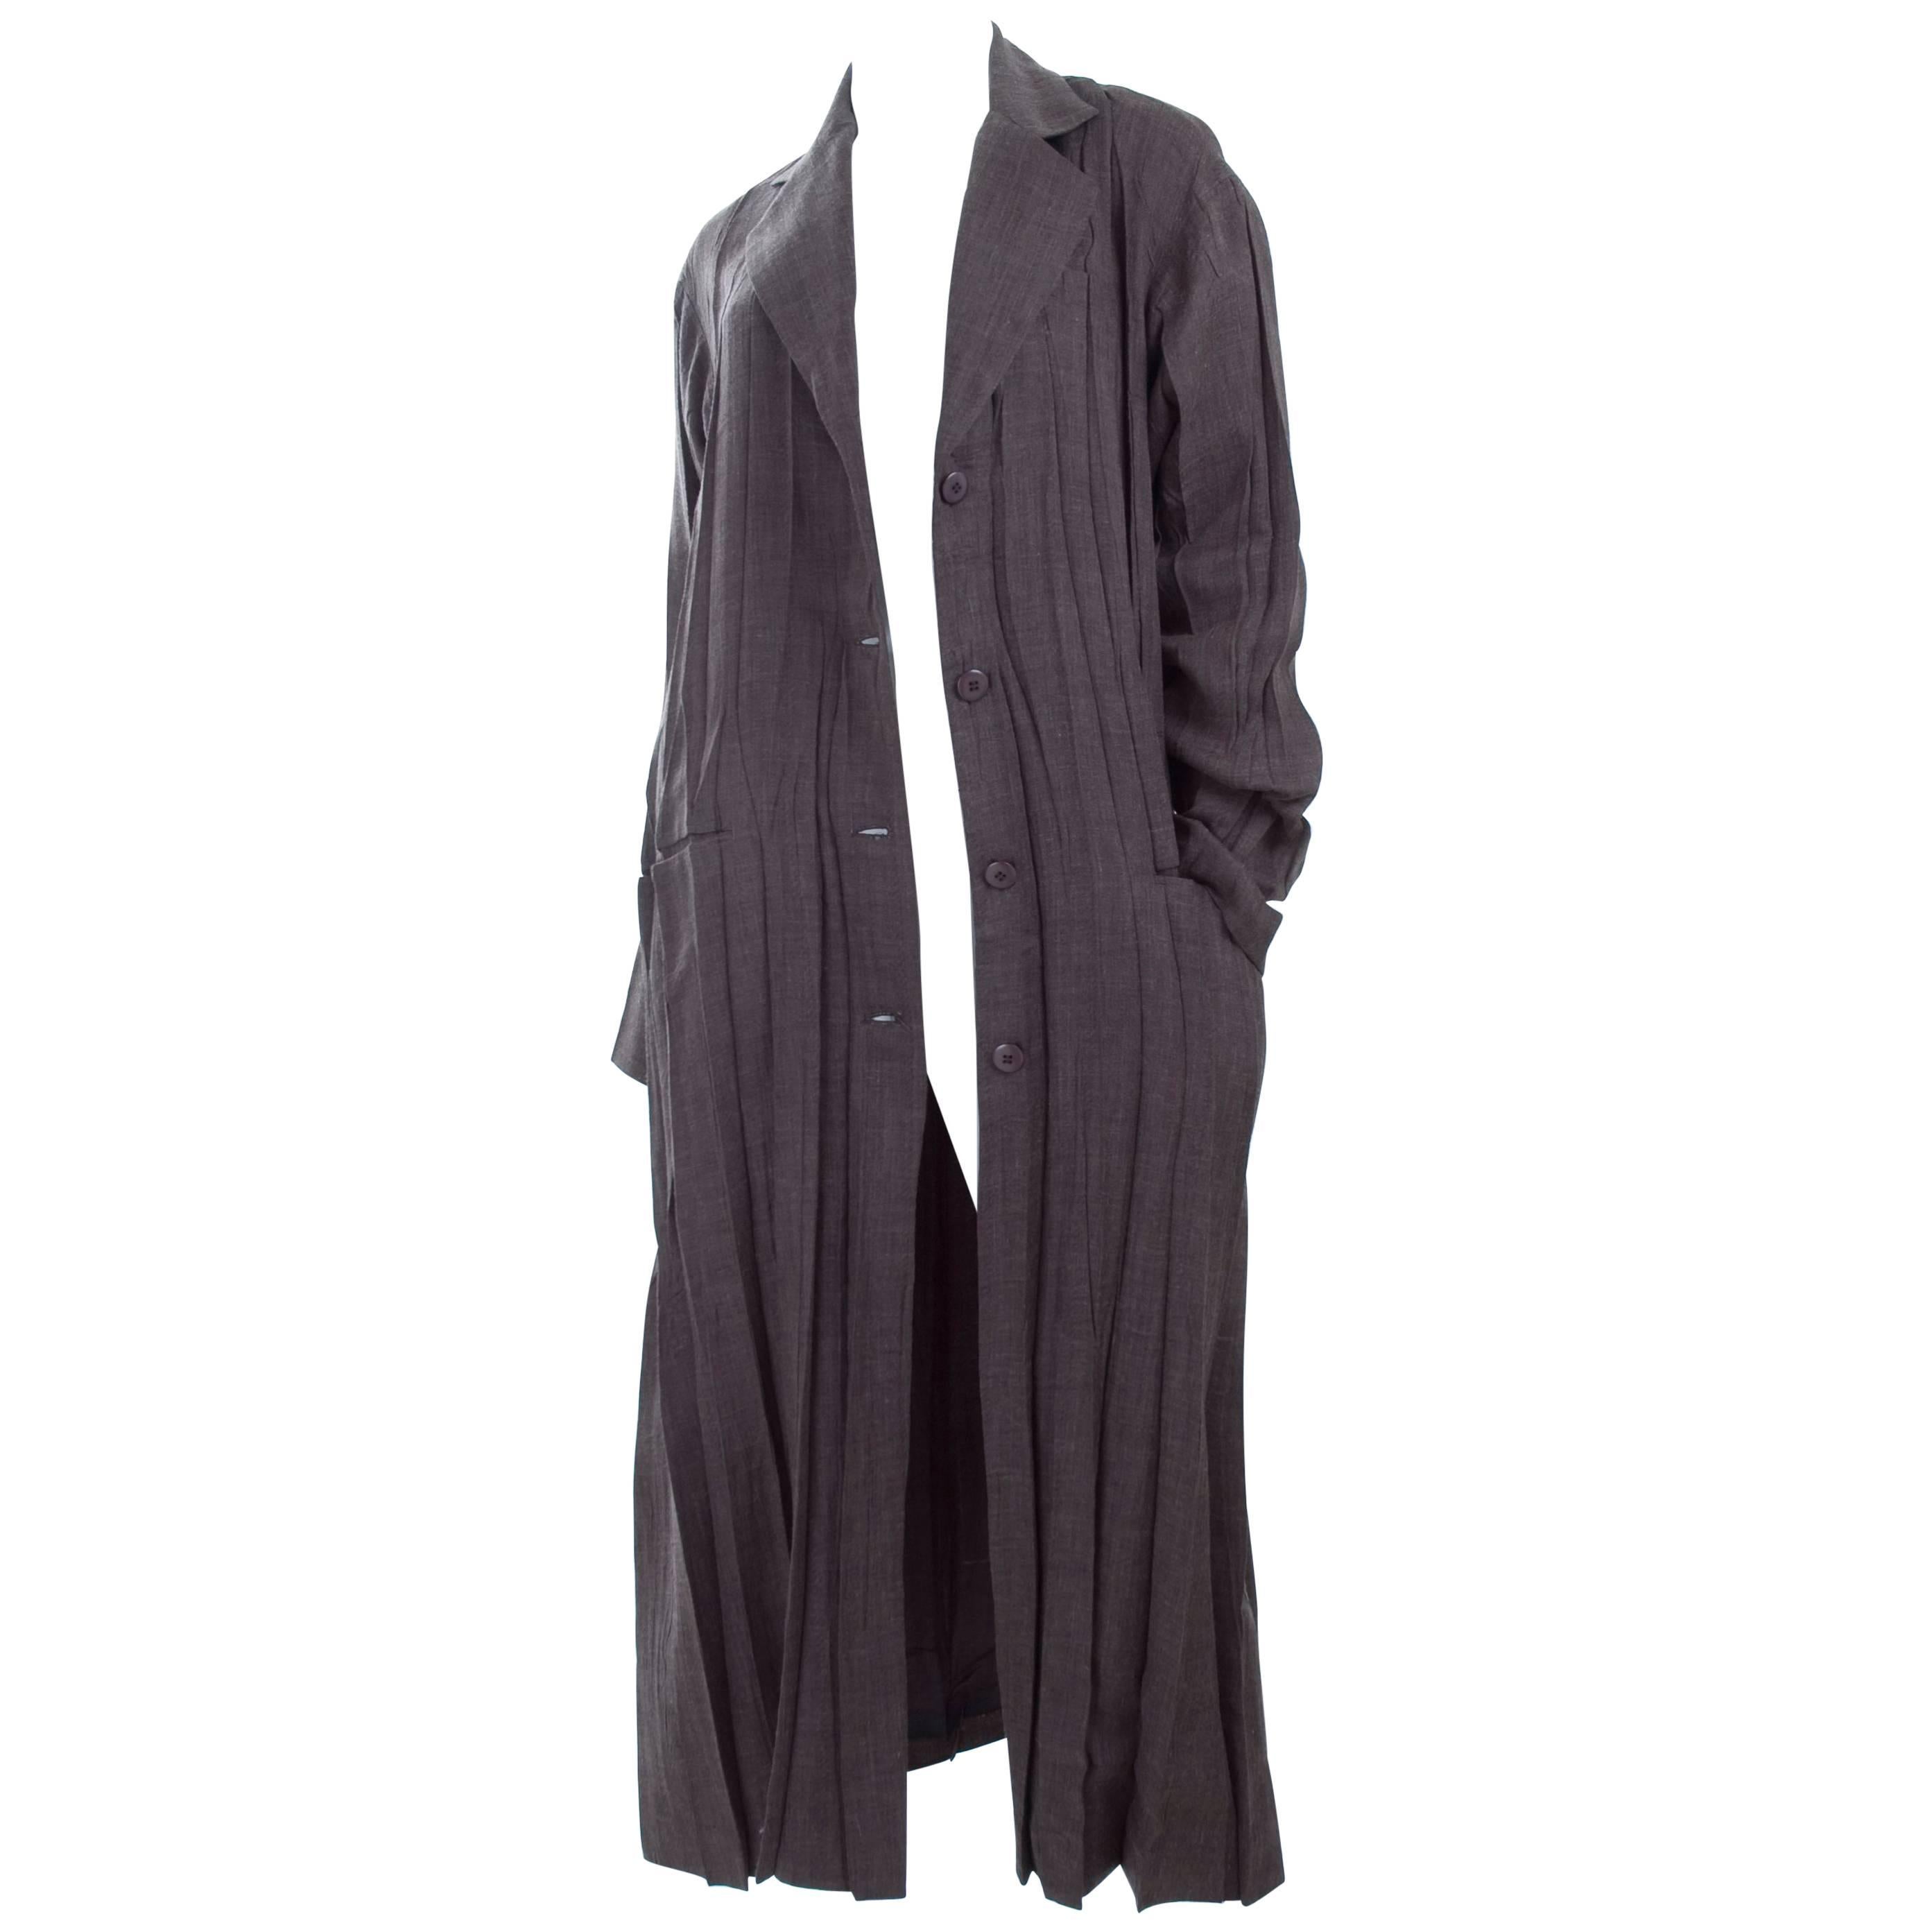 Issey Miyake Vintage Pleated Coat in Charcoal Size 3 For Sale